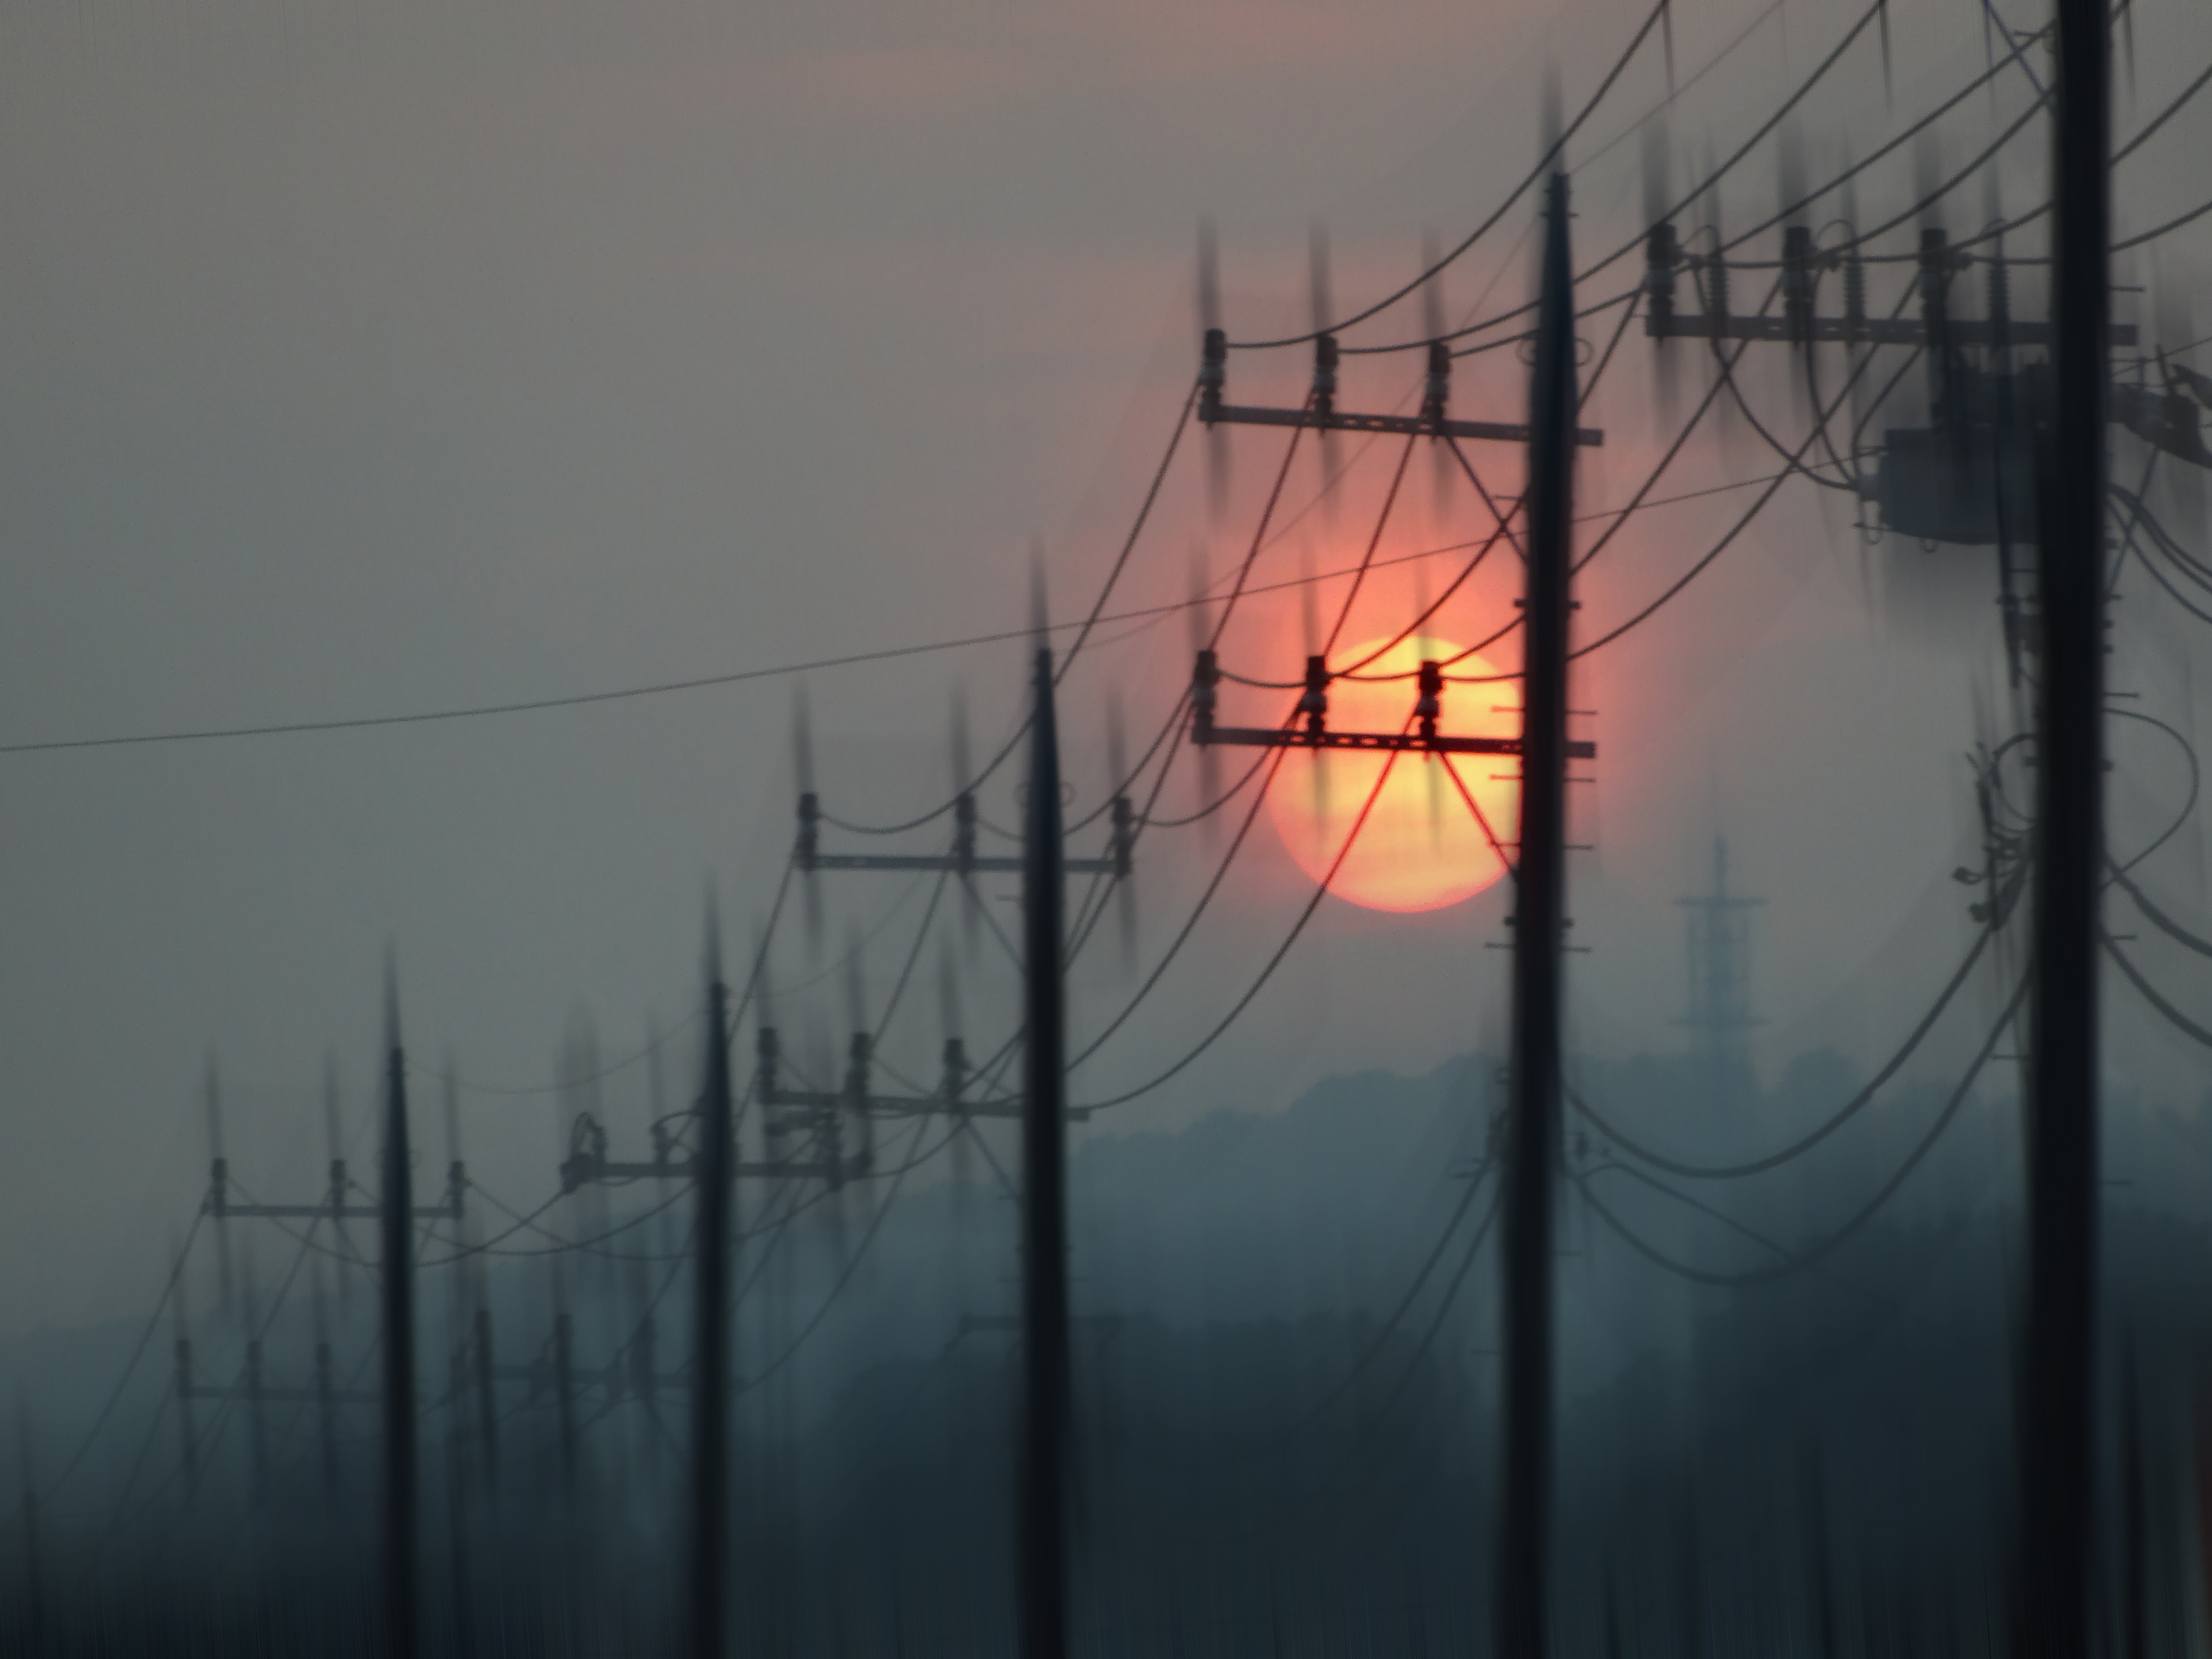 sunset, sun, miscellanea, miscellaneous, blur, smooth, pillars, posts, wires, wire download HD wallpaper